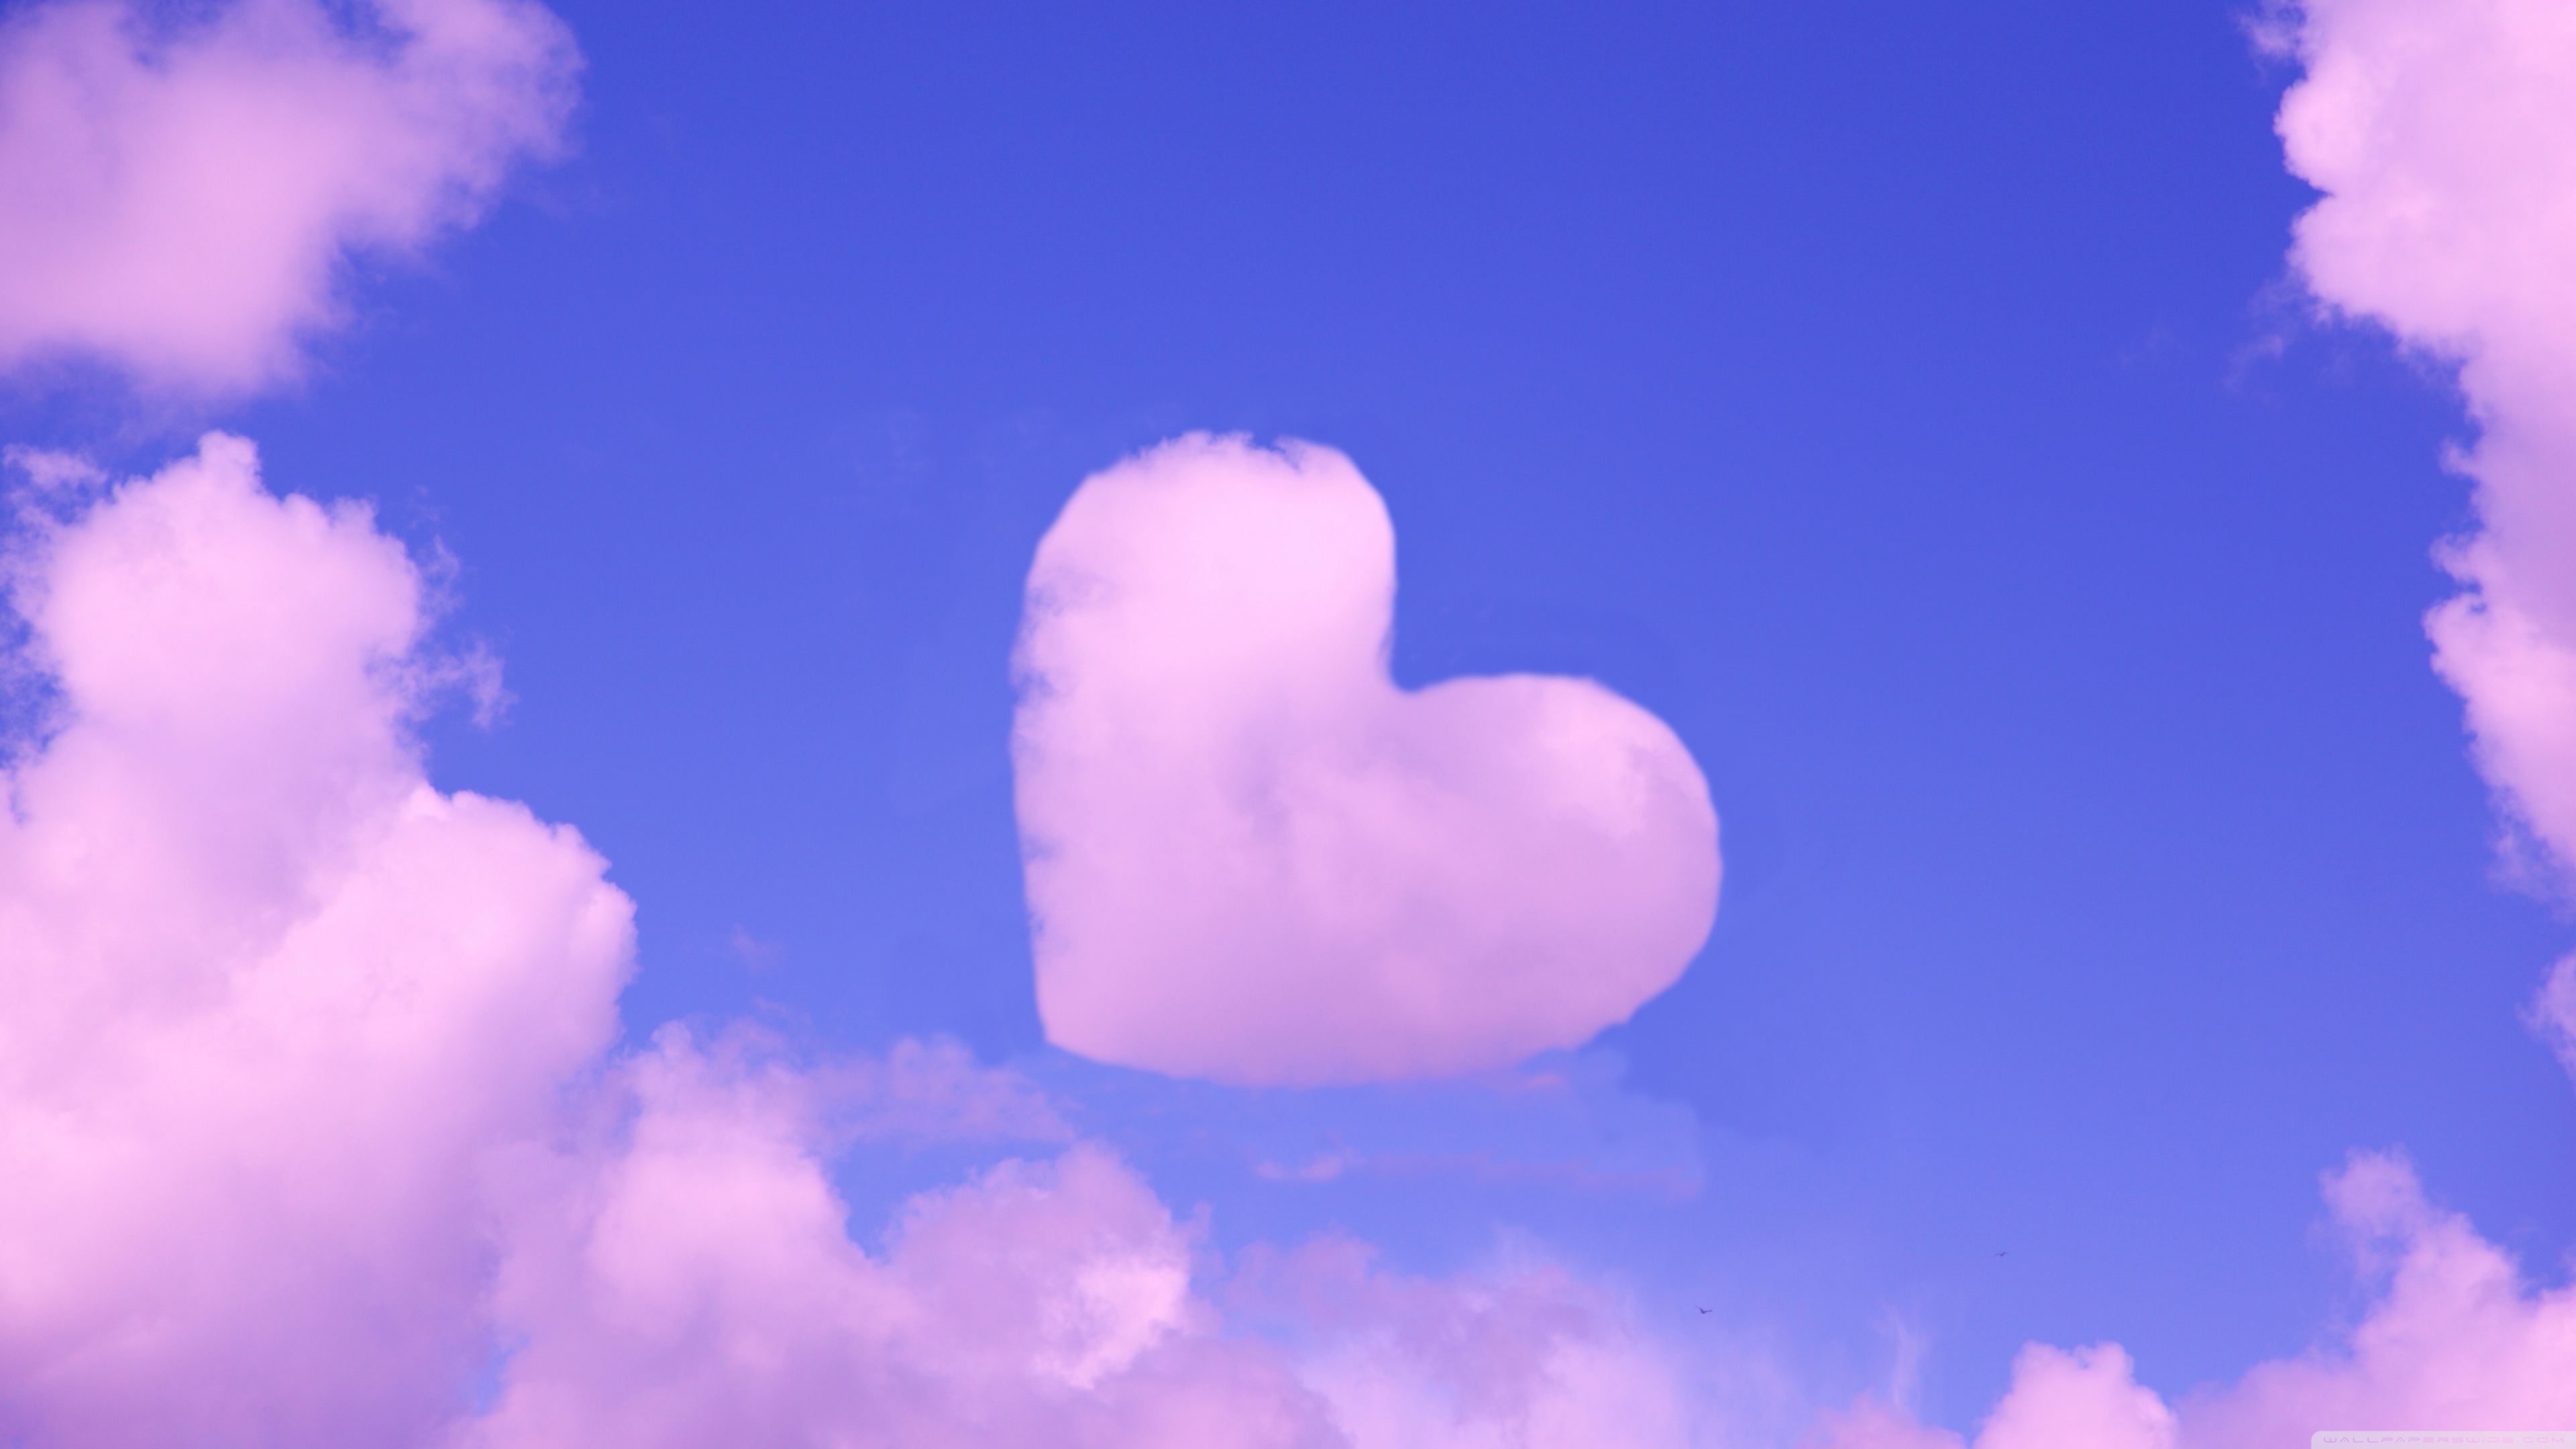 Love The Clouds Backgrounds - Pink Heart Shaped Clouds - HD Wallpaper 